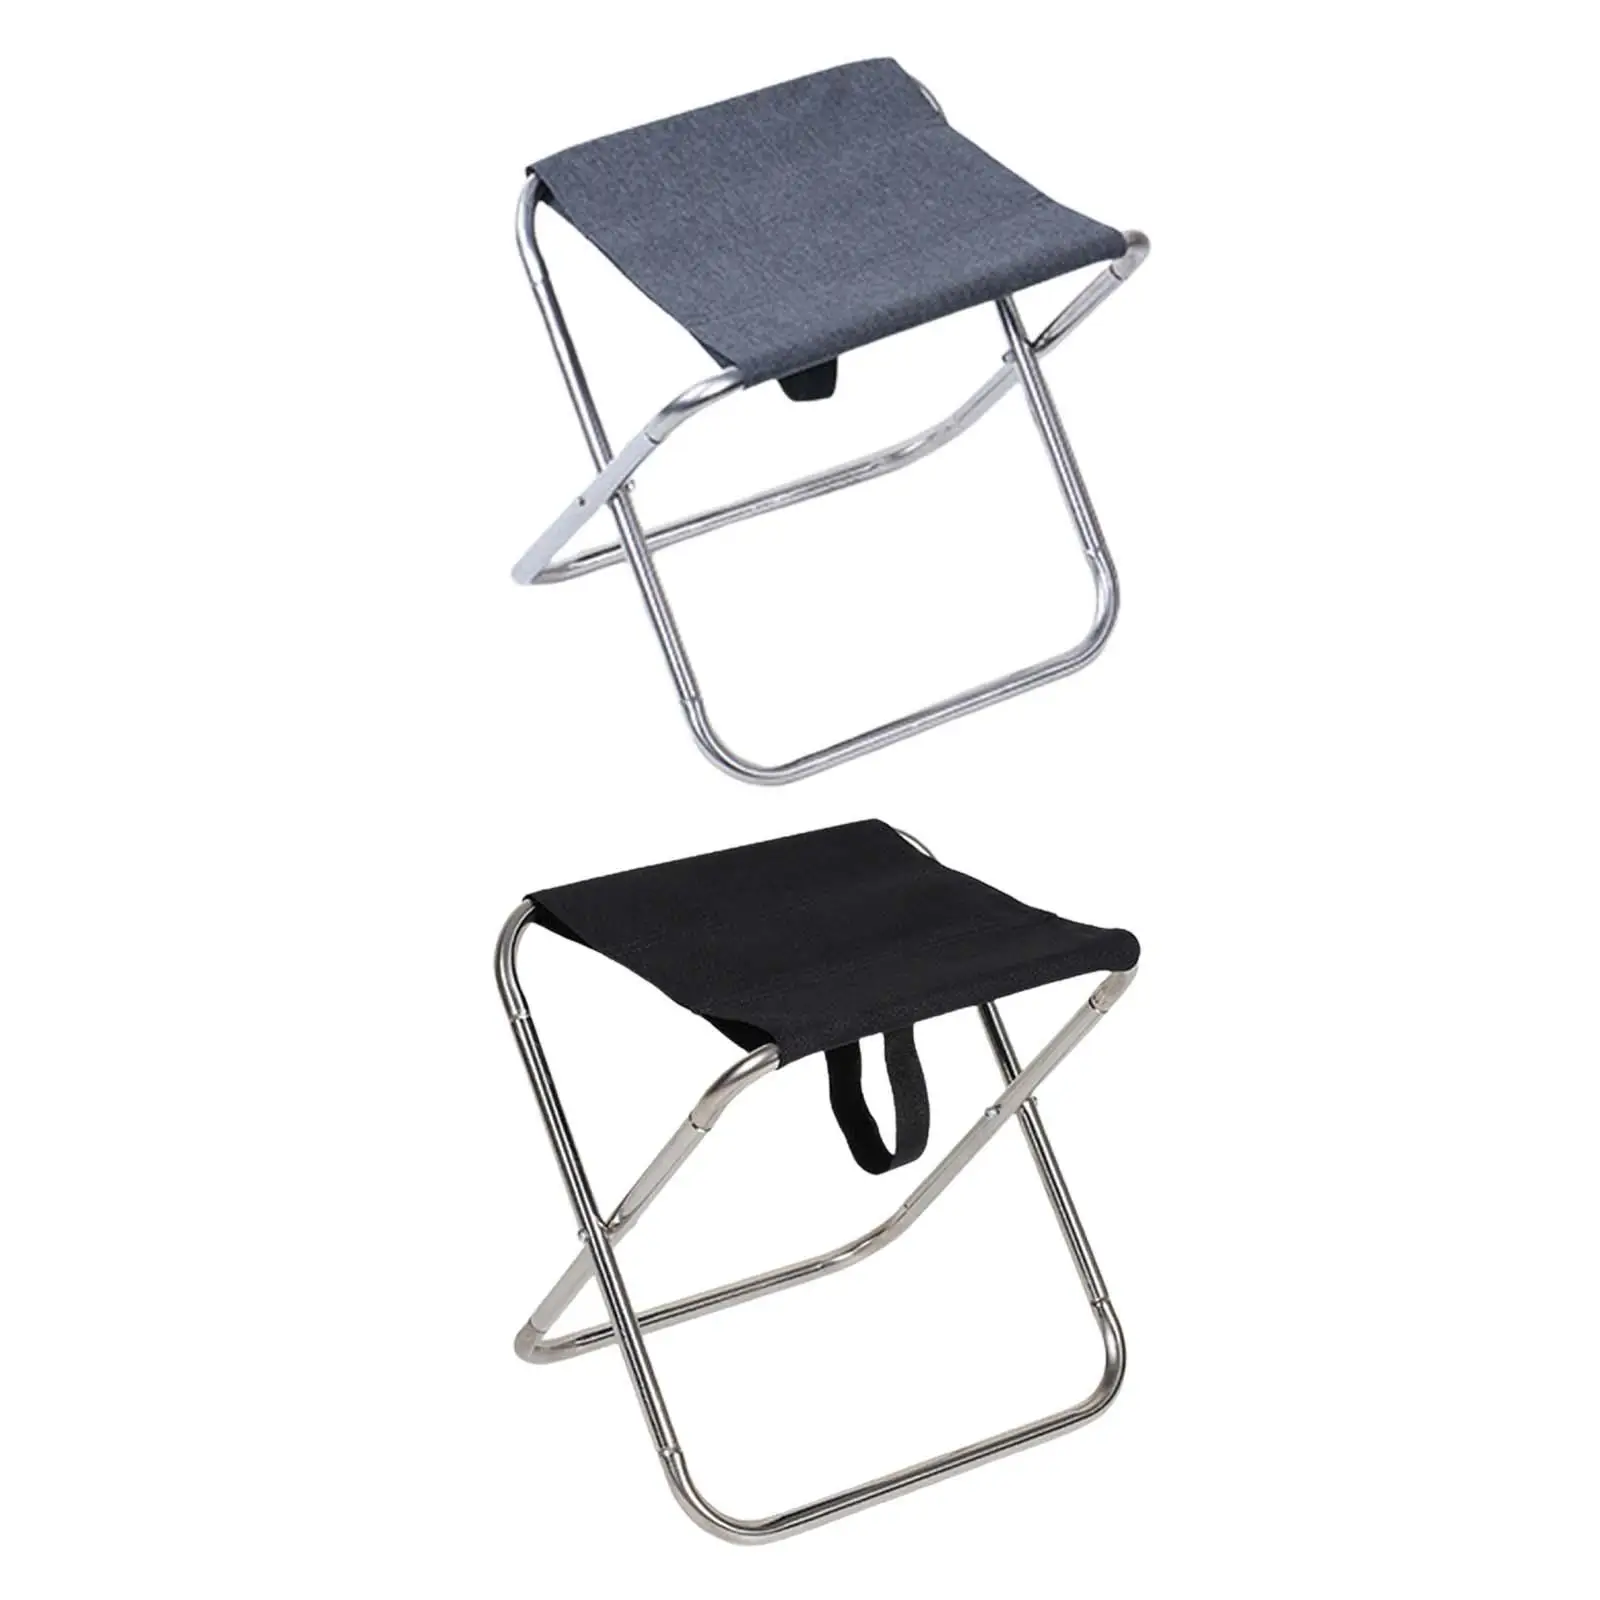 Camping Stool Folding Lightweight Camp Stool Outdoor Camping Chair Collapsible Portable for Park BBQ Festival Concert